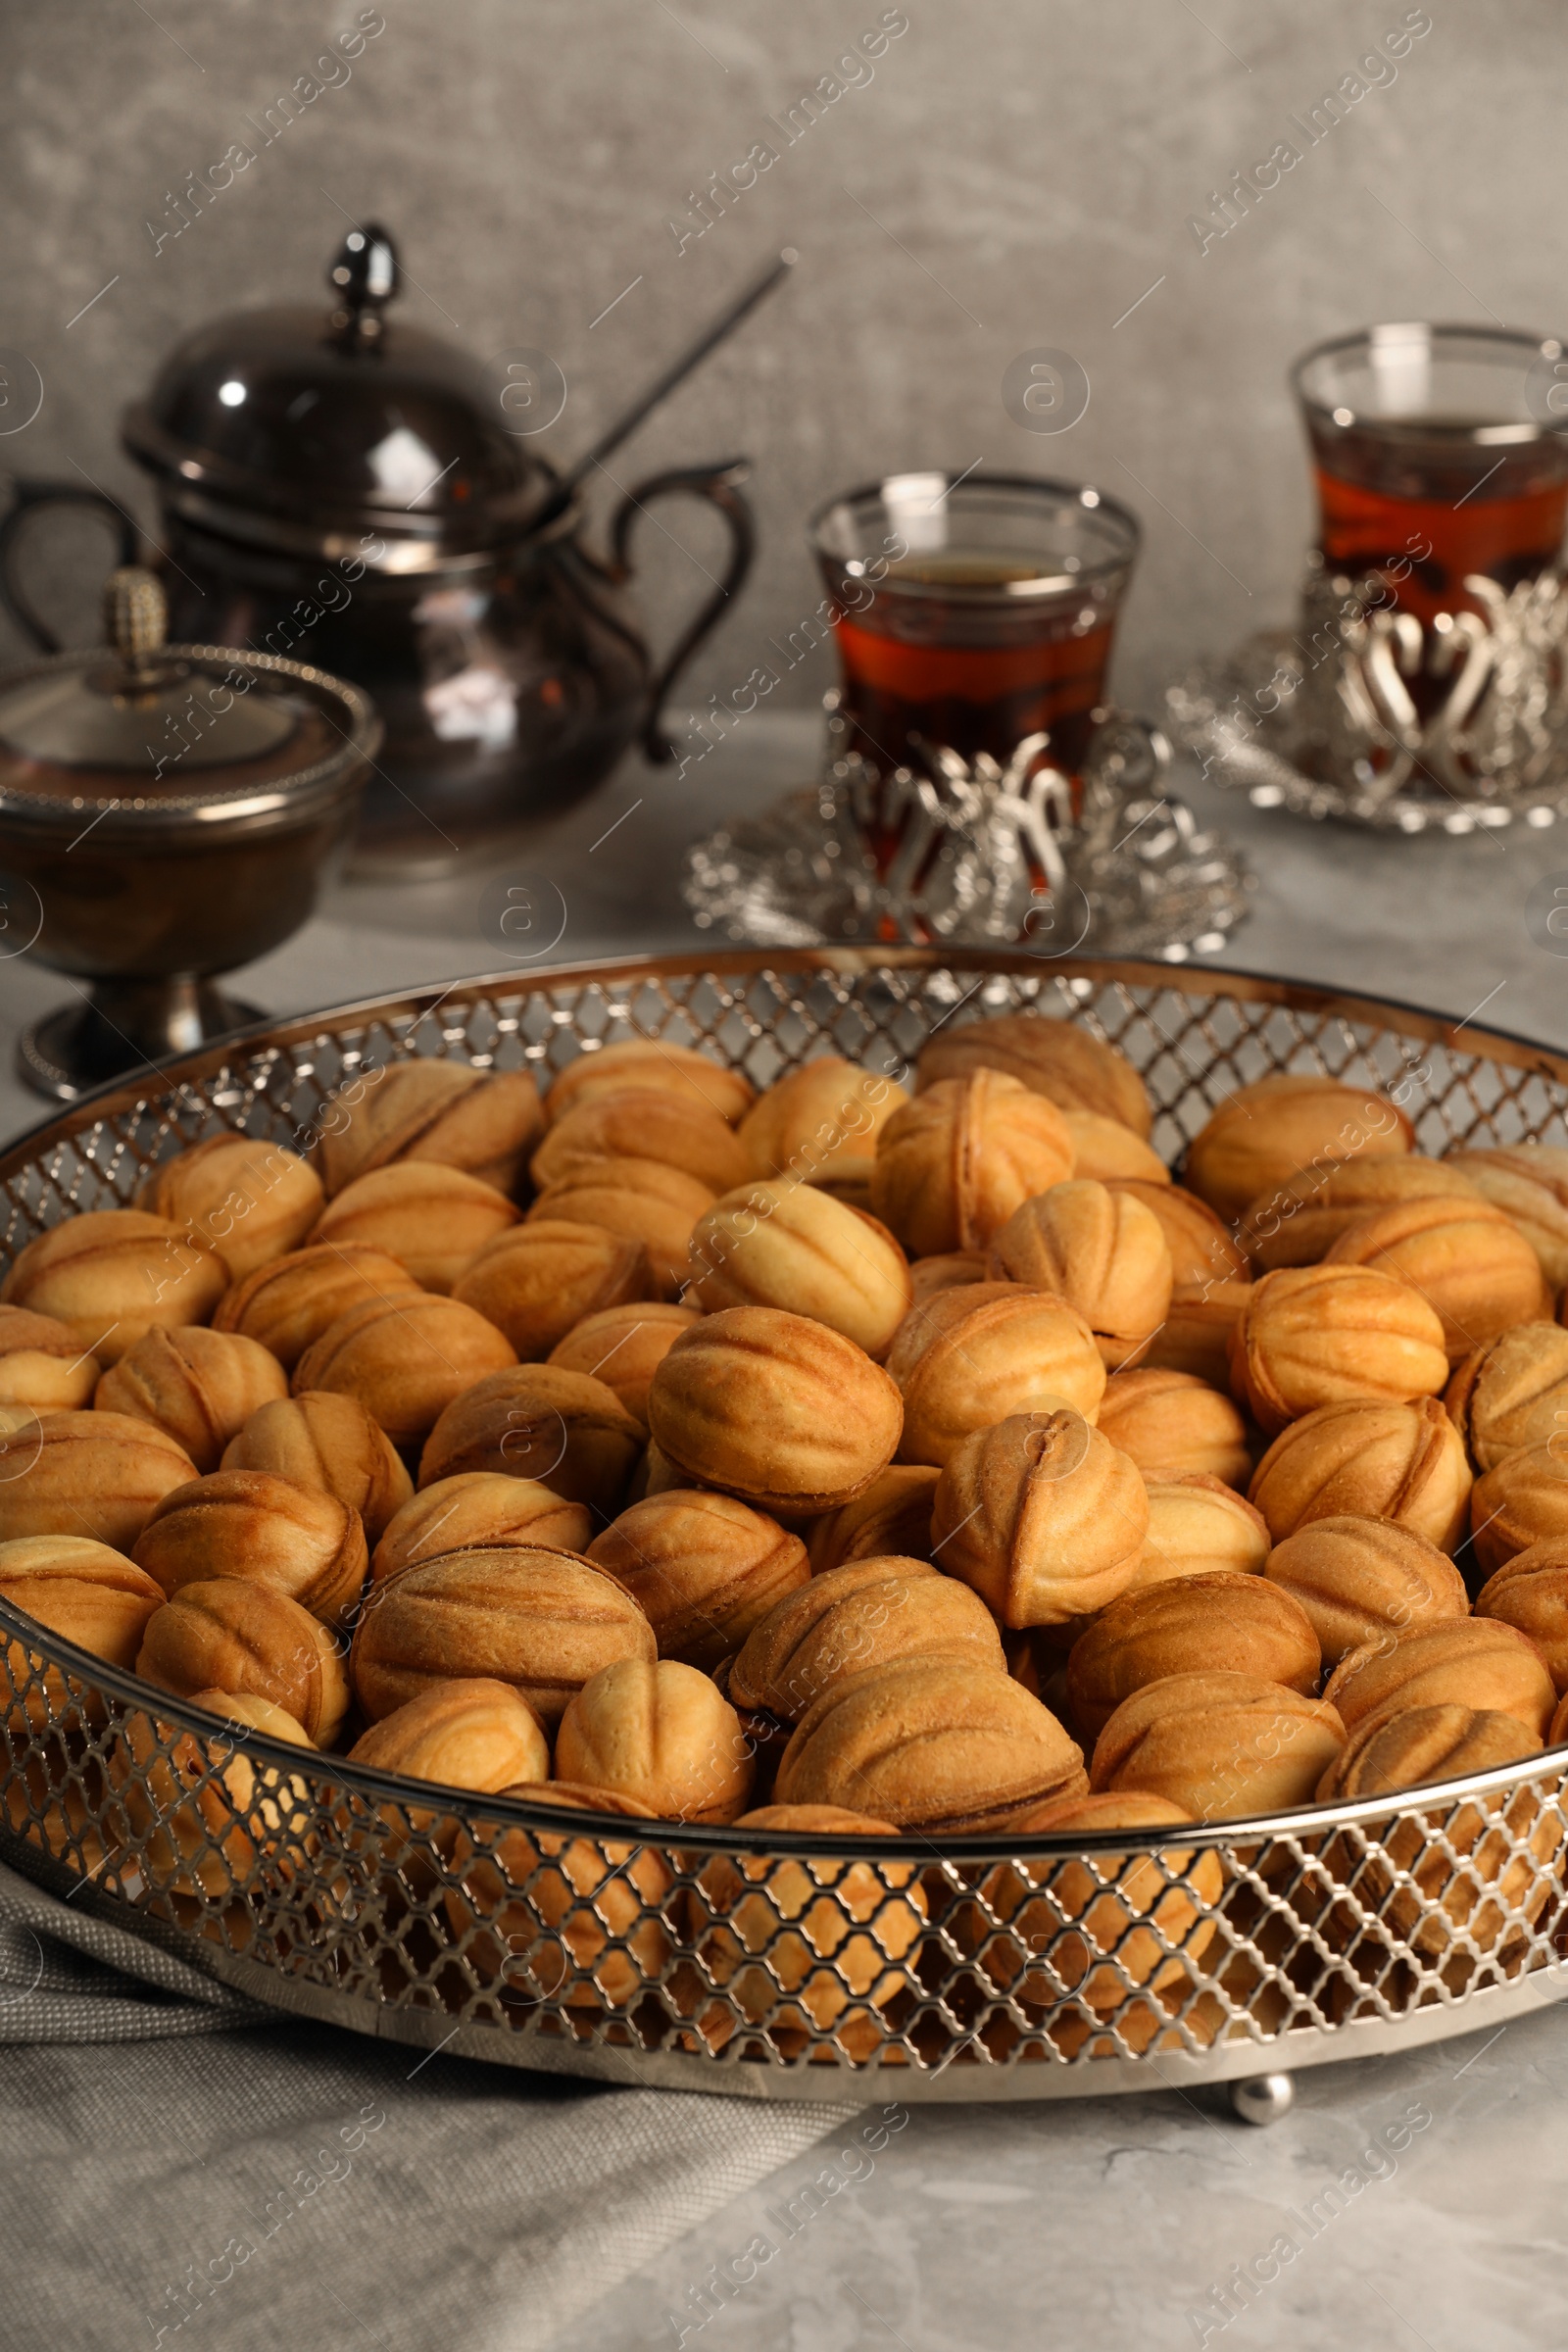 Photo of Delicious walnut shaped cookies and tea on grey table. Tasty pastry carrying nostalgic home atmosphere